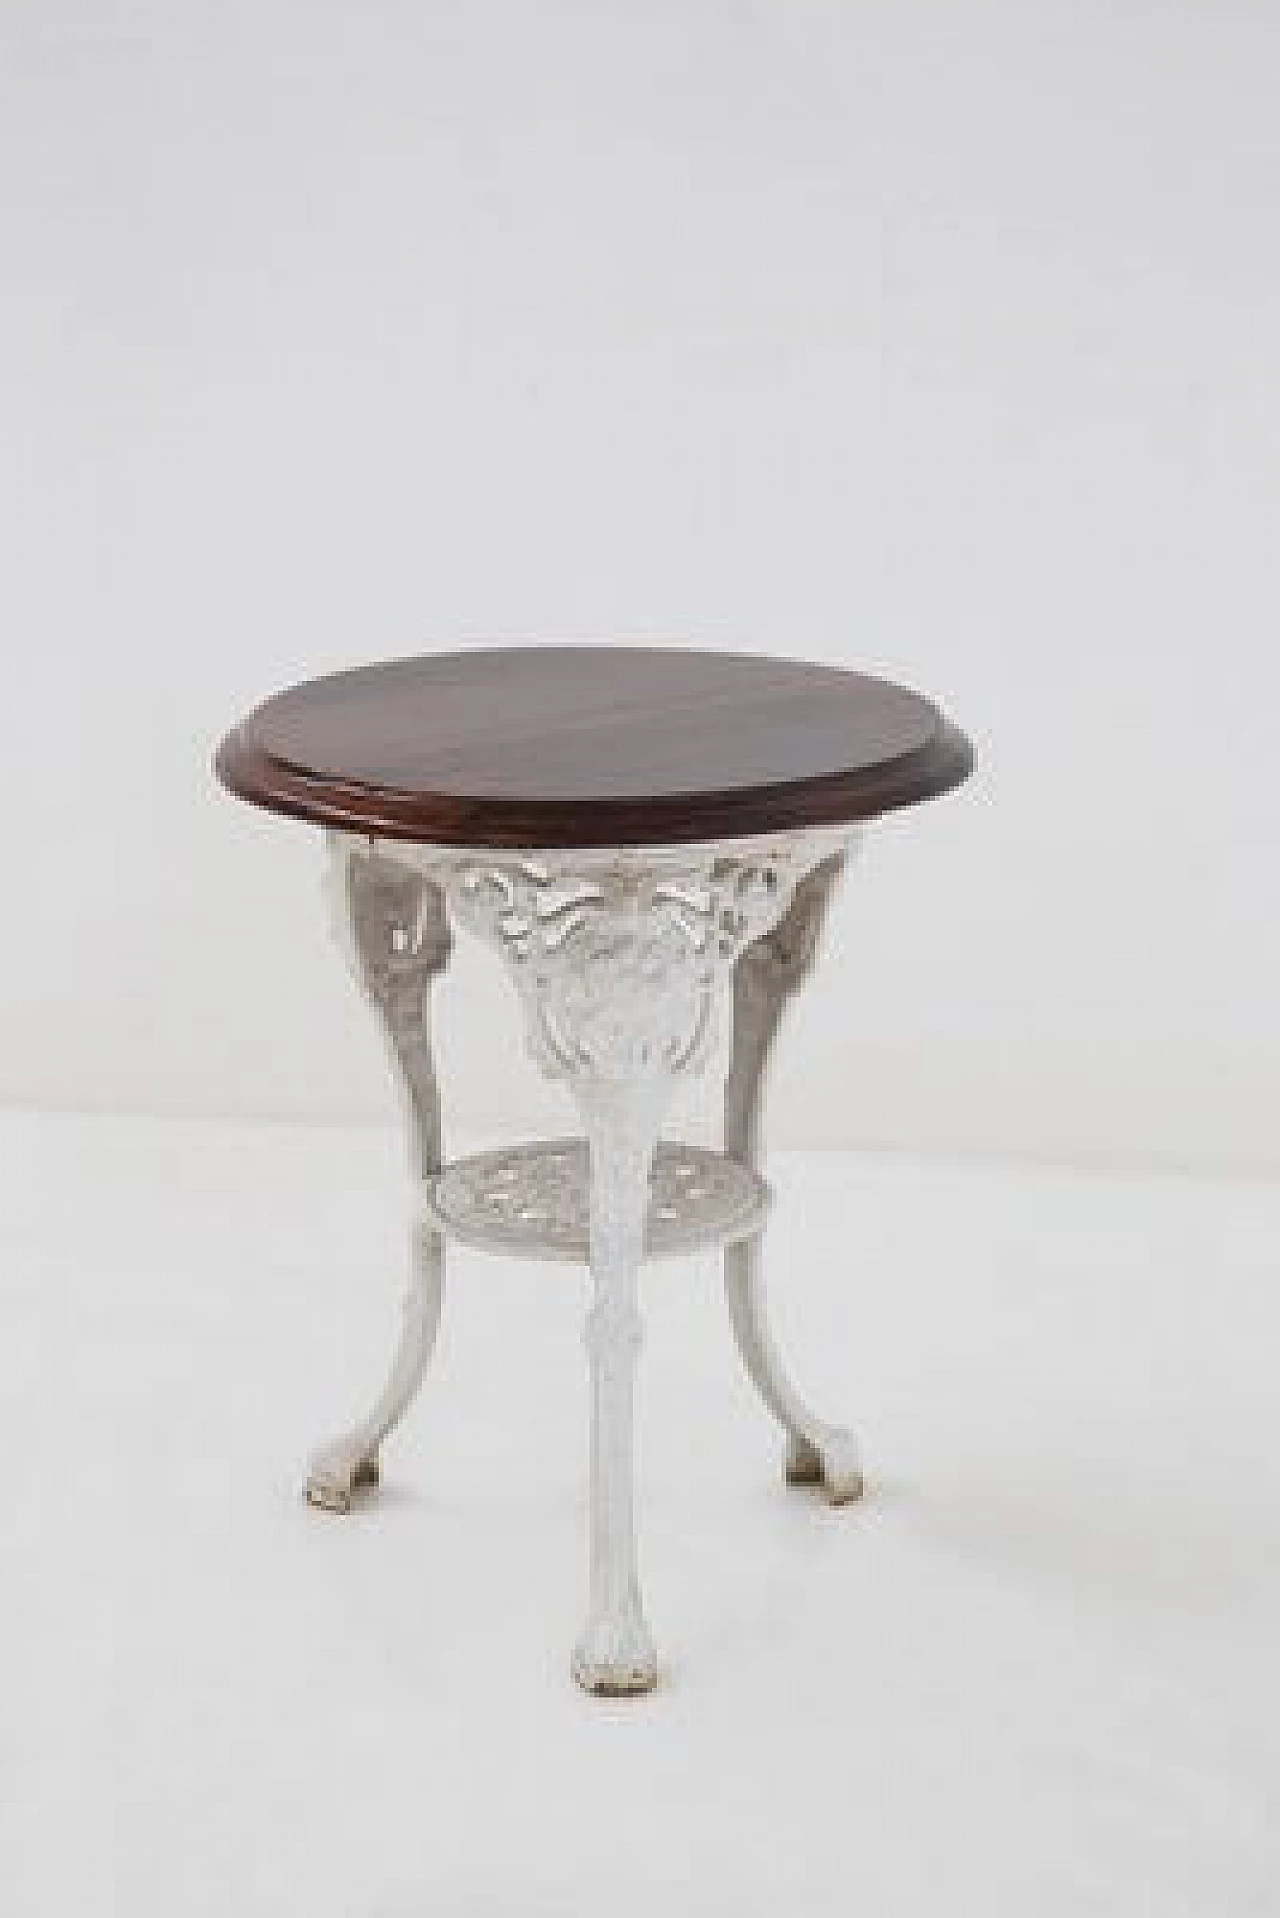 Cast iron table with wooden top, 19th century 1